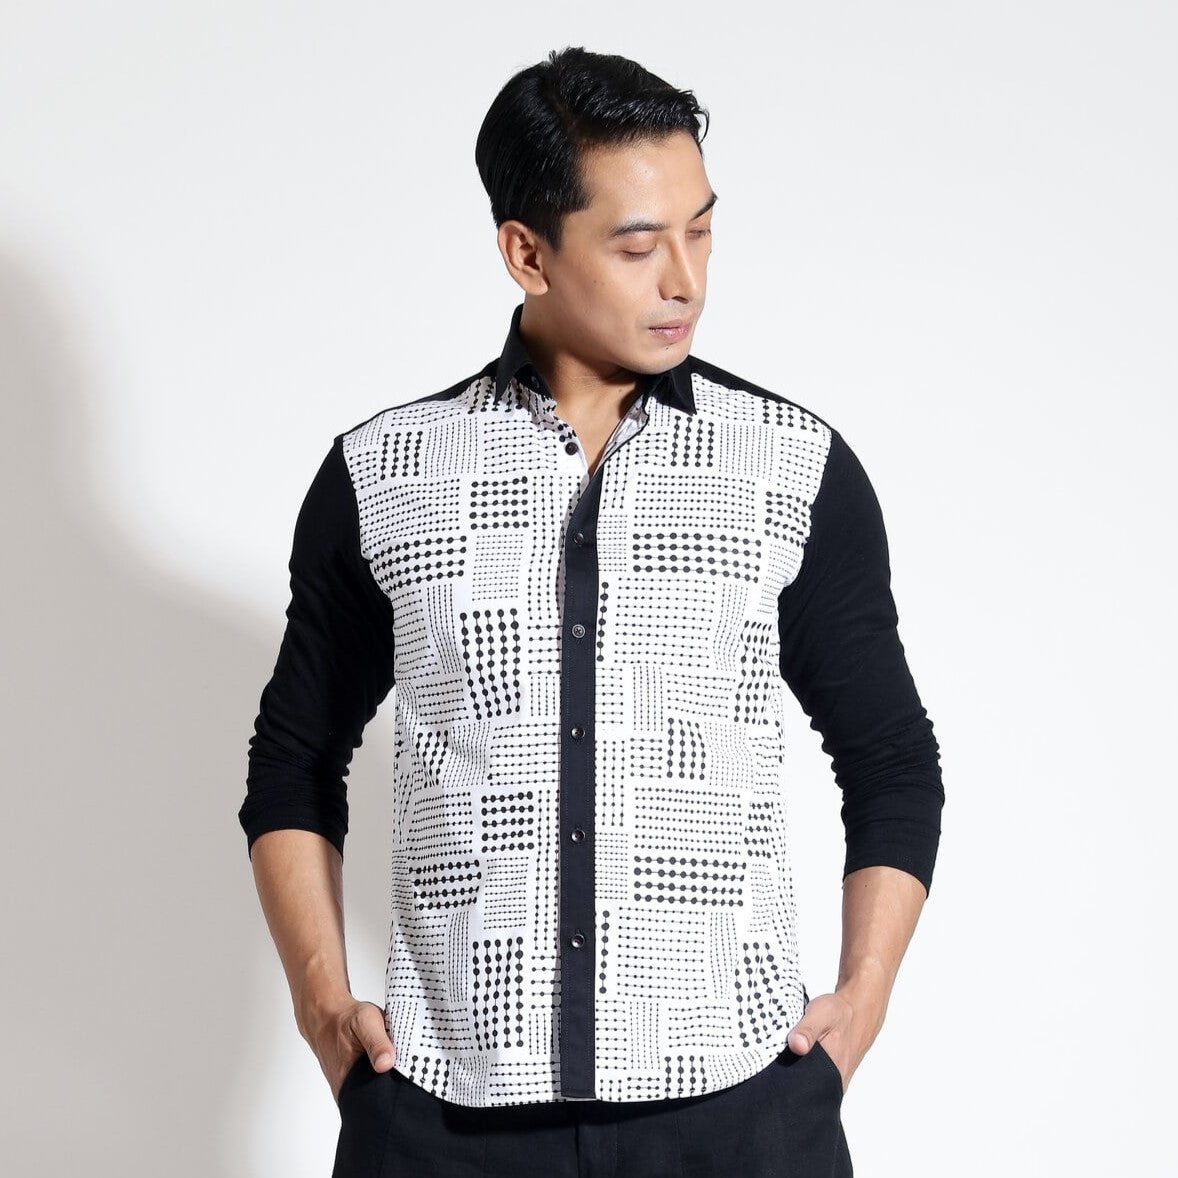 Long sleeve shirt with dot and line print and jersey sleeves